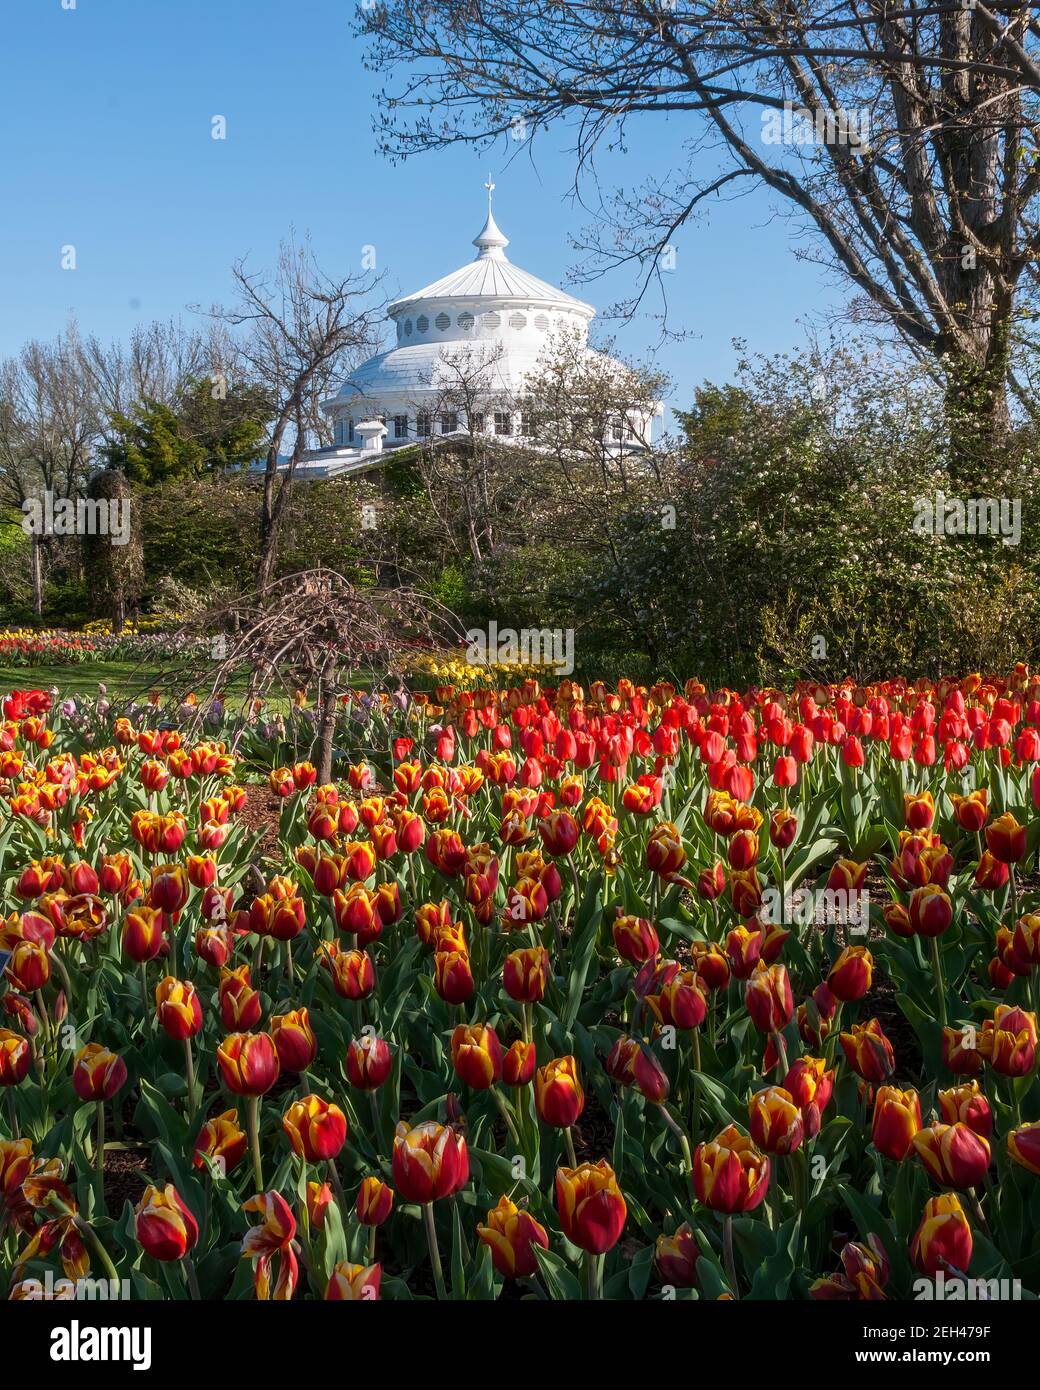 A view of the tulips and elephant house Cincinnati Zoo & Botanical Gardens- Zoo Blooms 2007 Stock Photo